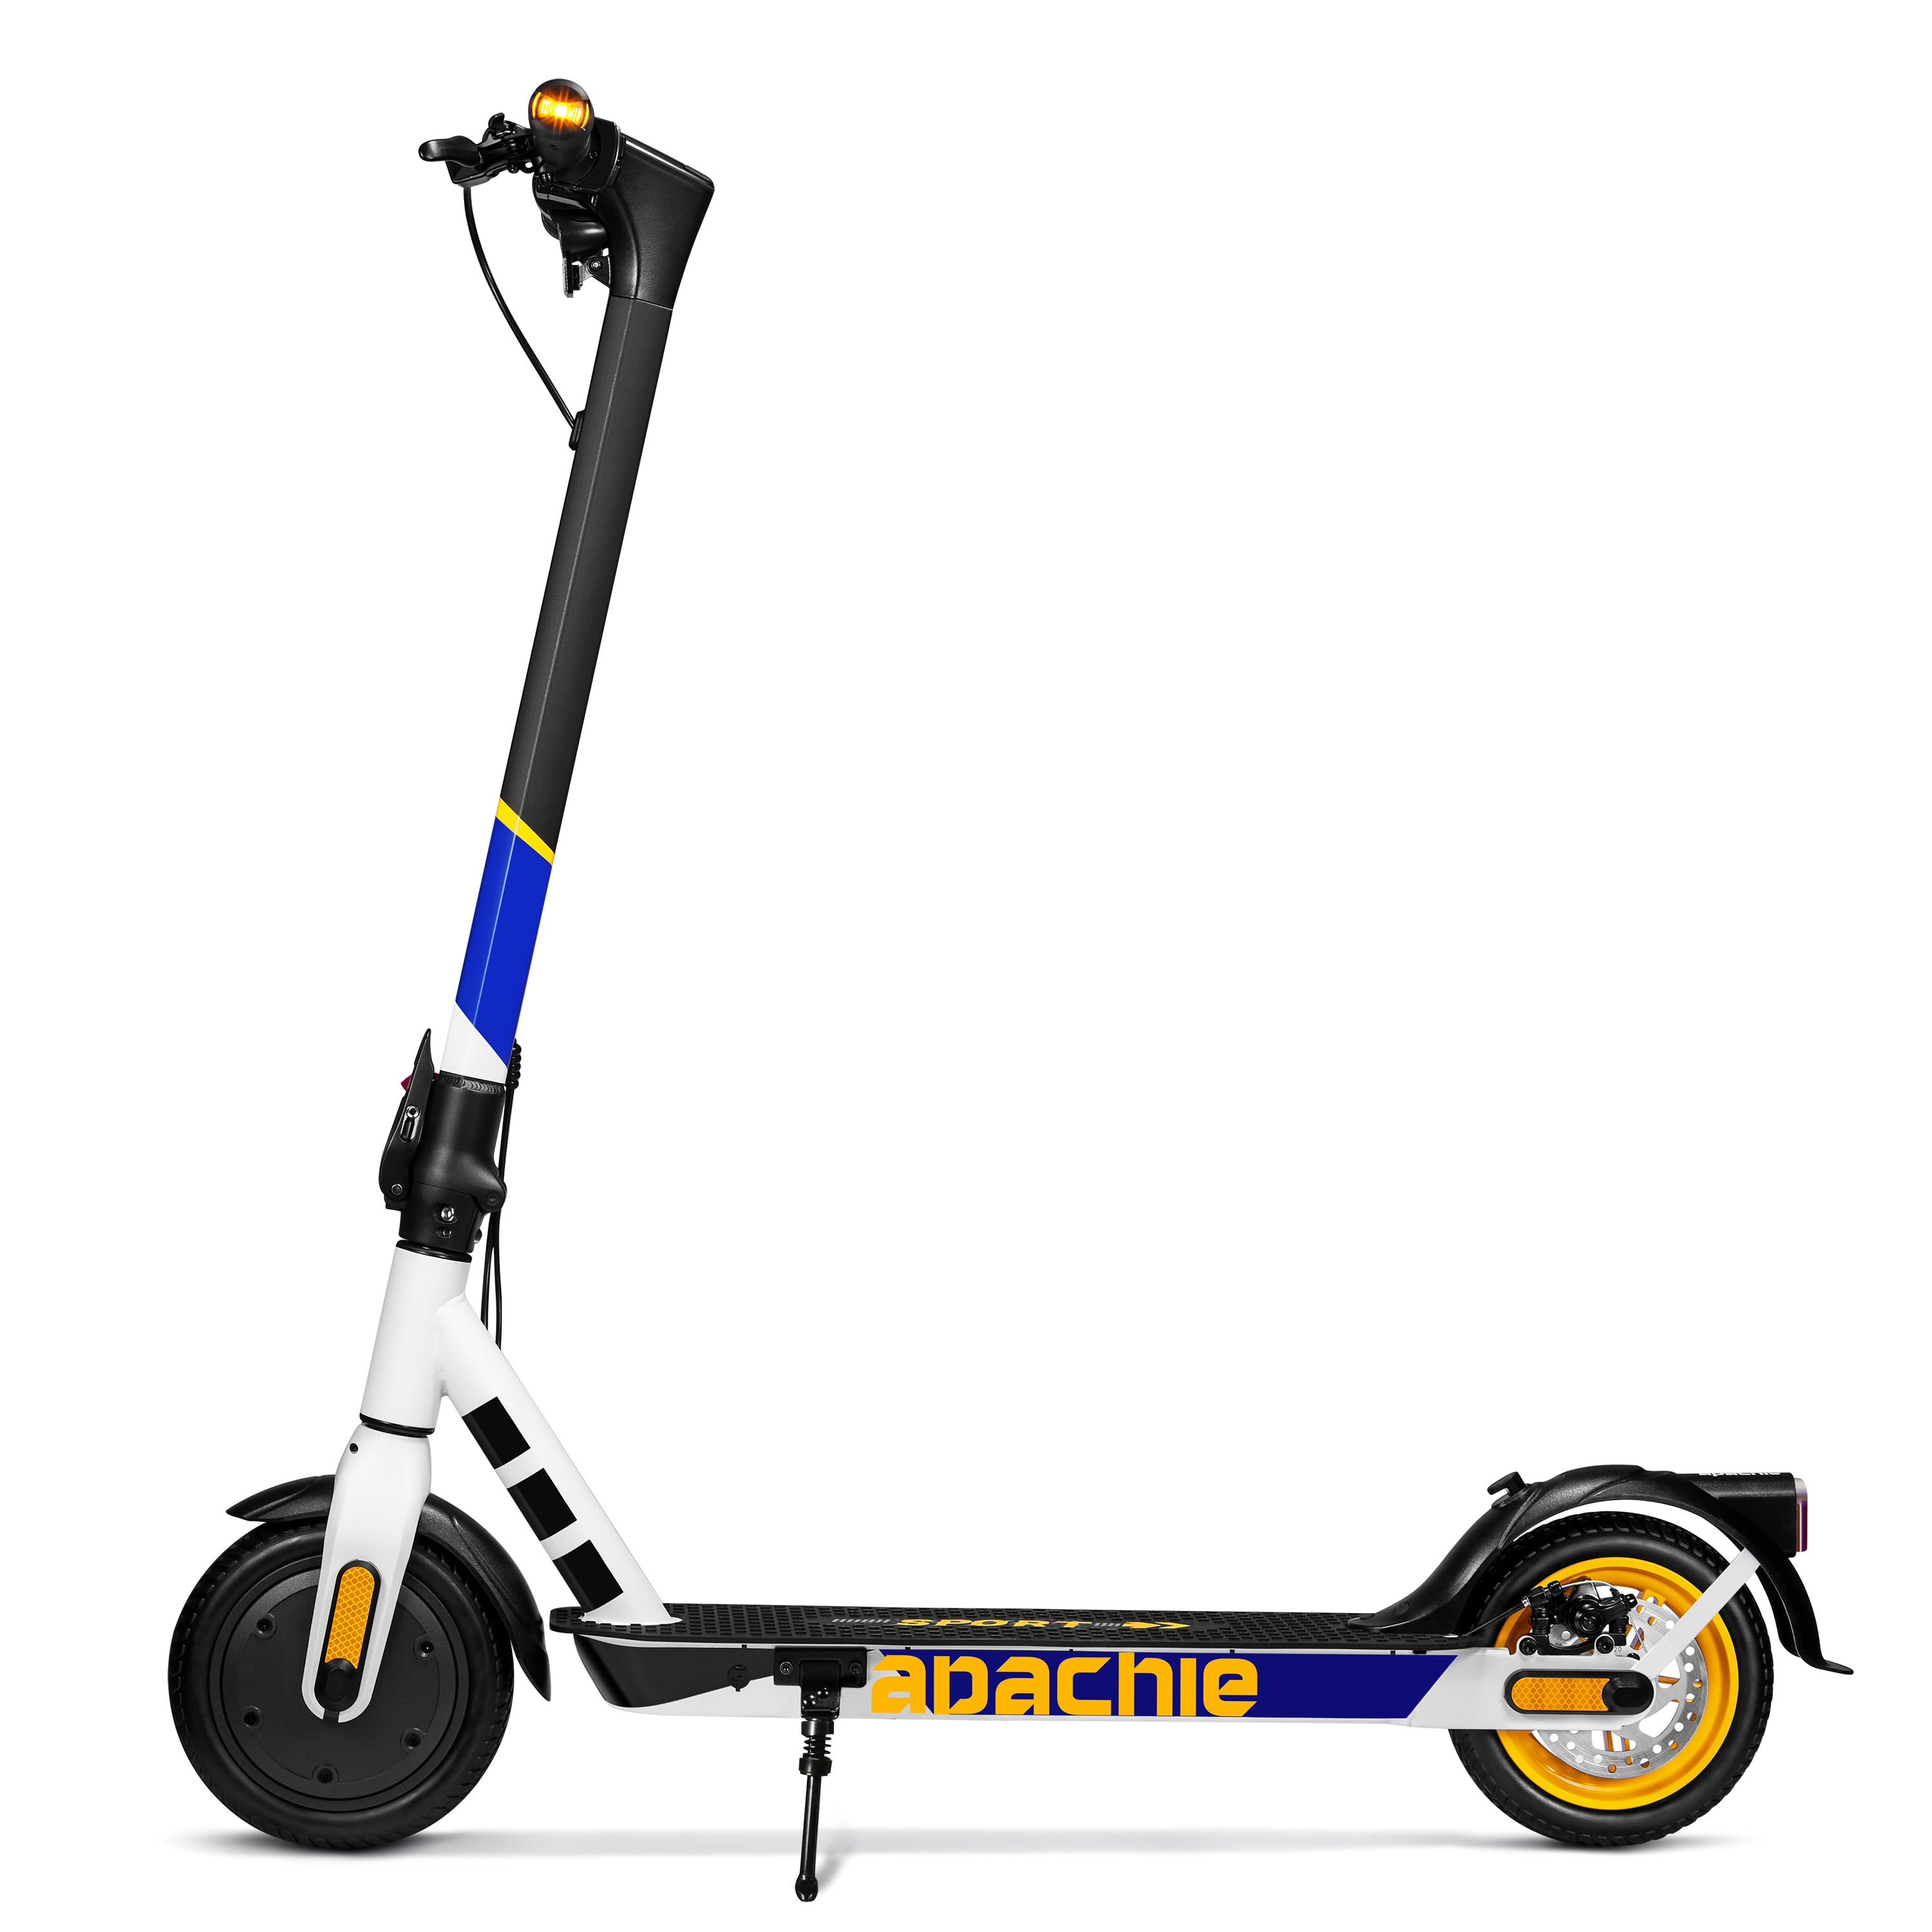 Apachie M4S 350W Electric Scooter